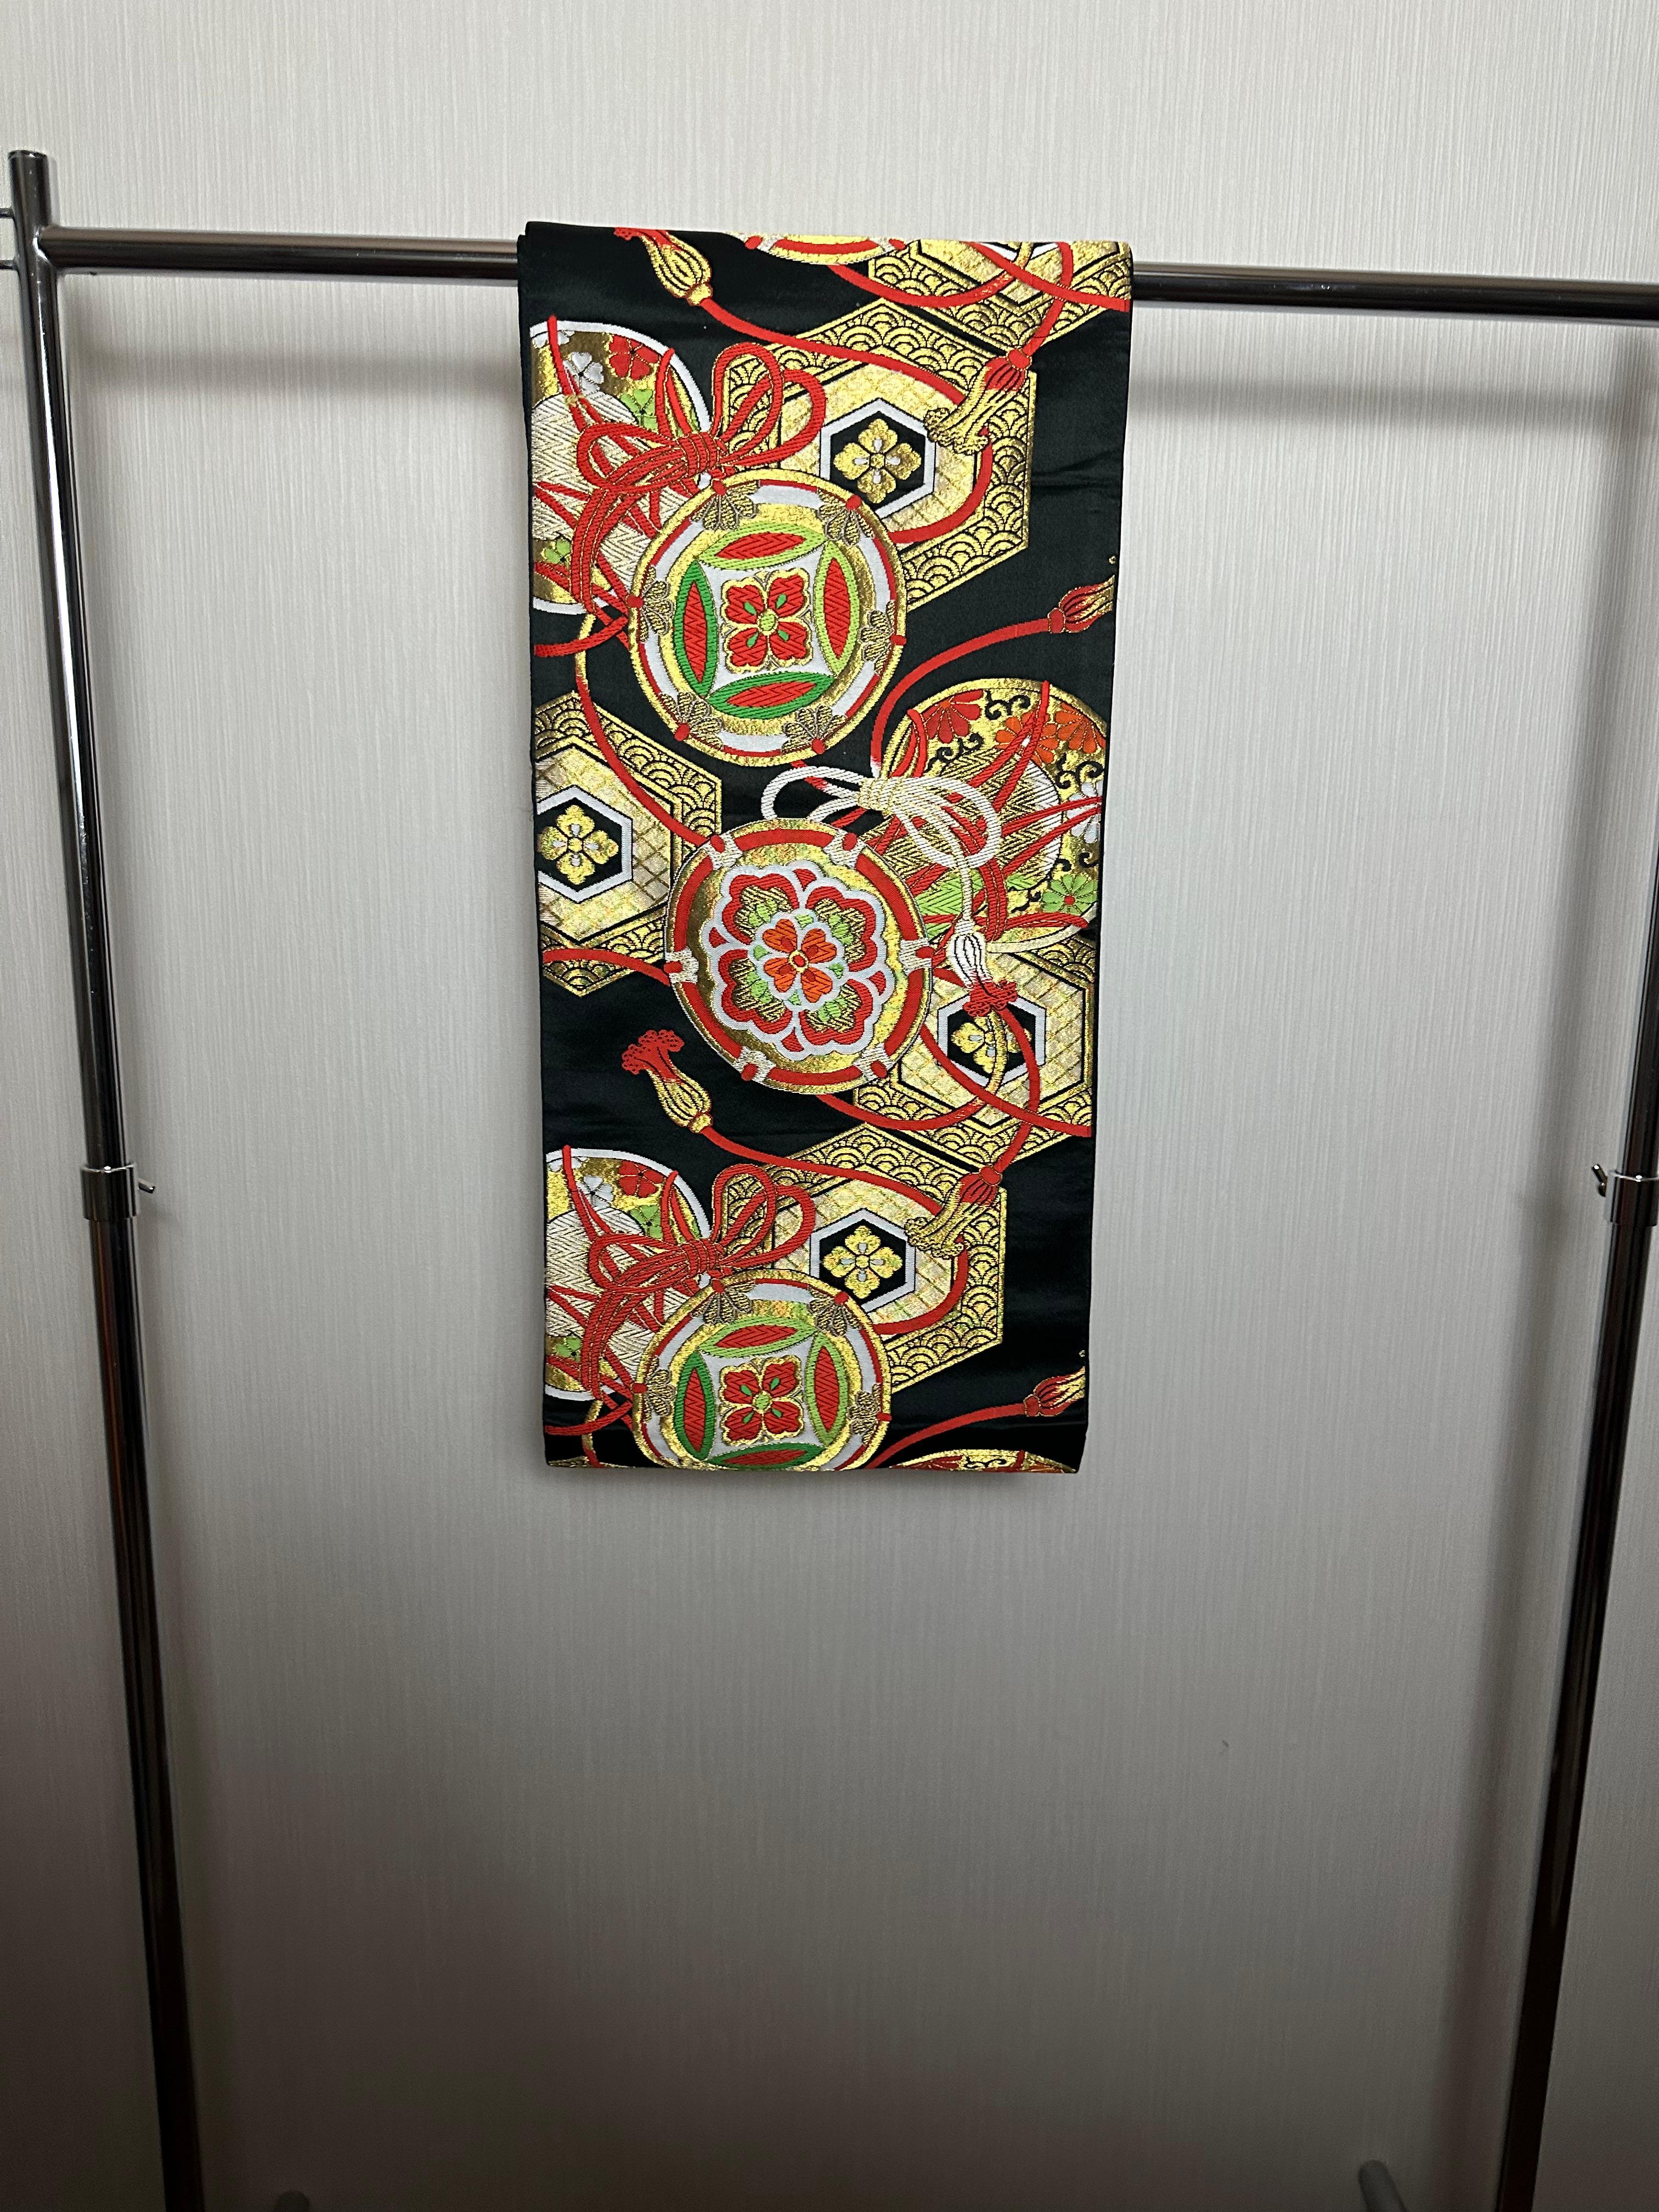 Japanese Vintage Kimono Obi by Kimono-Couture

Dimensions: 417×31cm
Conditions: Very Good Condition
Shipping Method: DHL

The Japanese kimono obi is a traditional Japanese craft that is produced through countless processes.
Kimono obis are filled